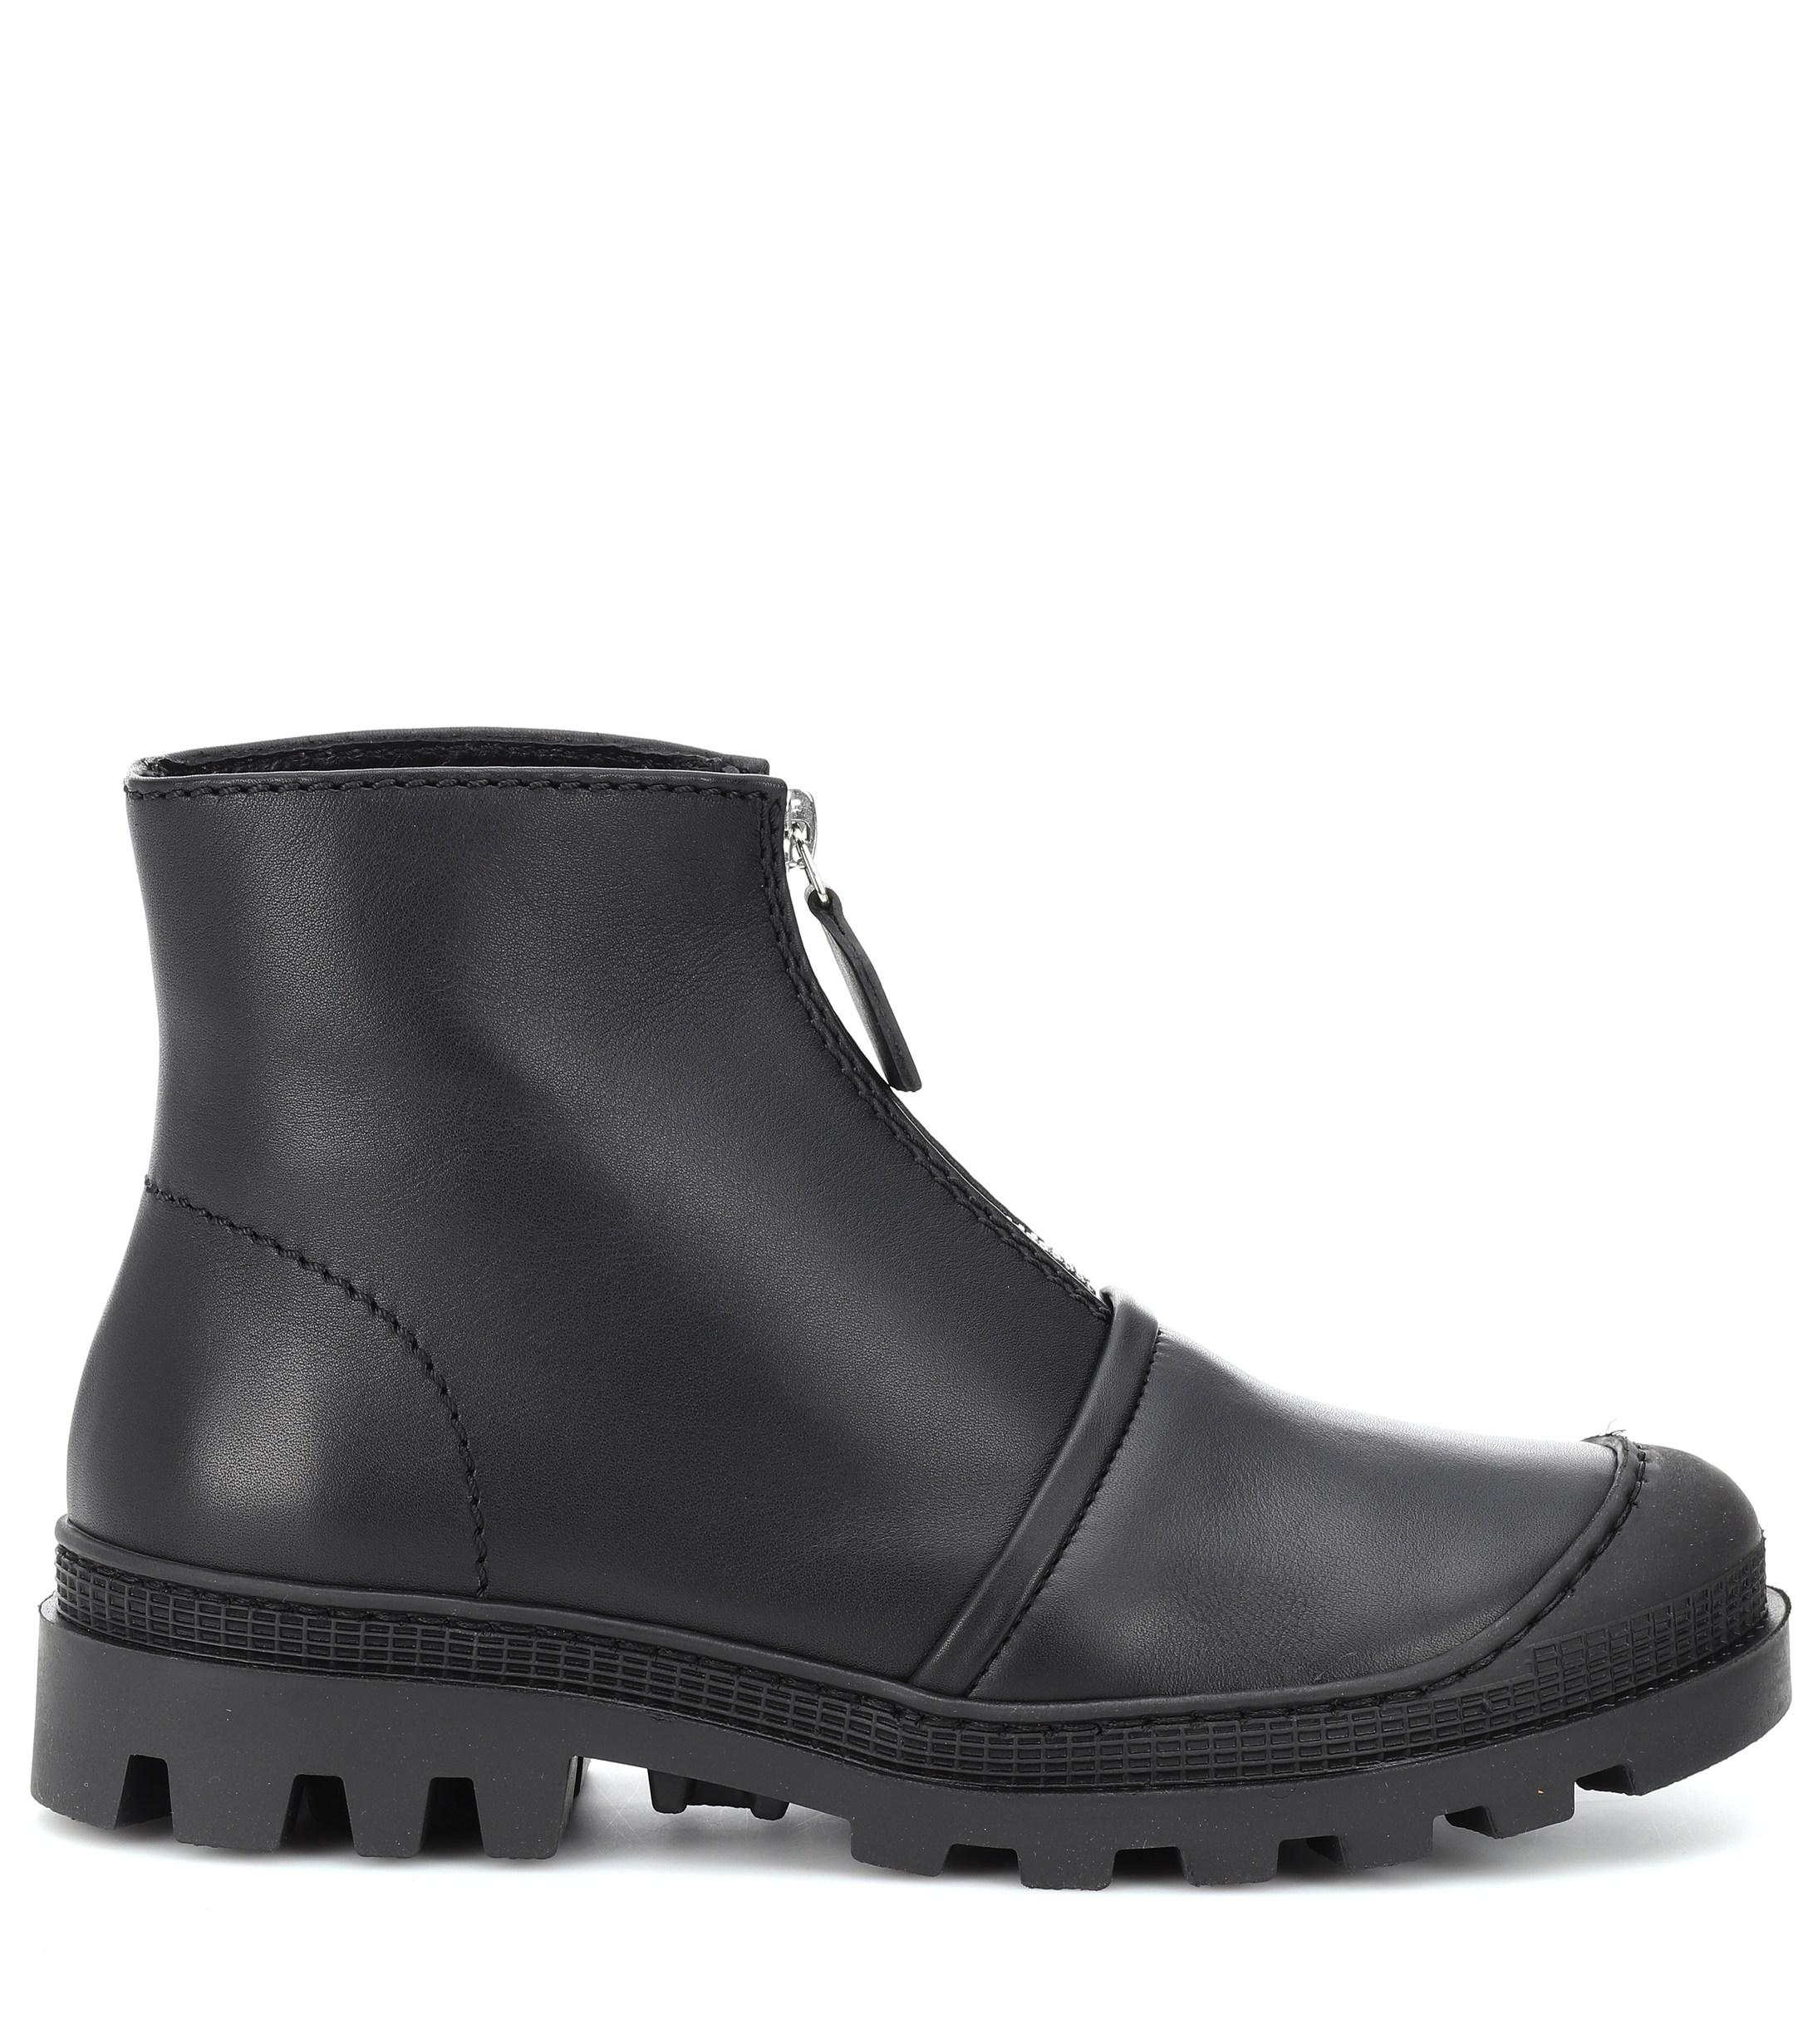 Loewe Leather Ankle Boots in Black - Lyst